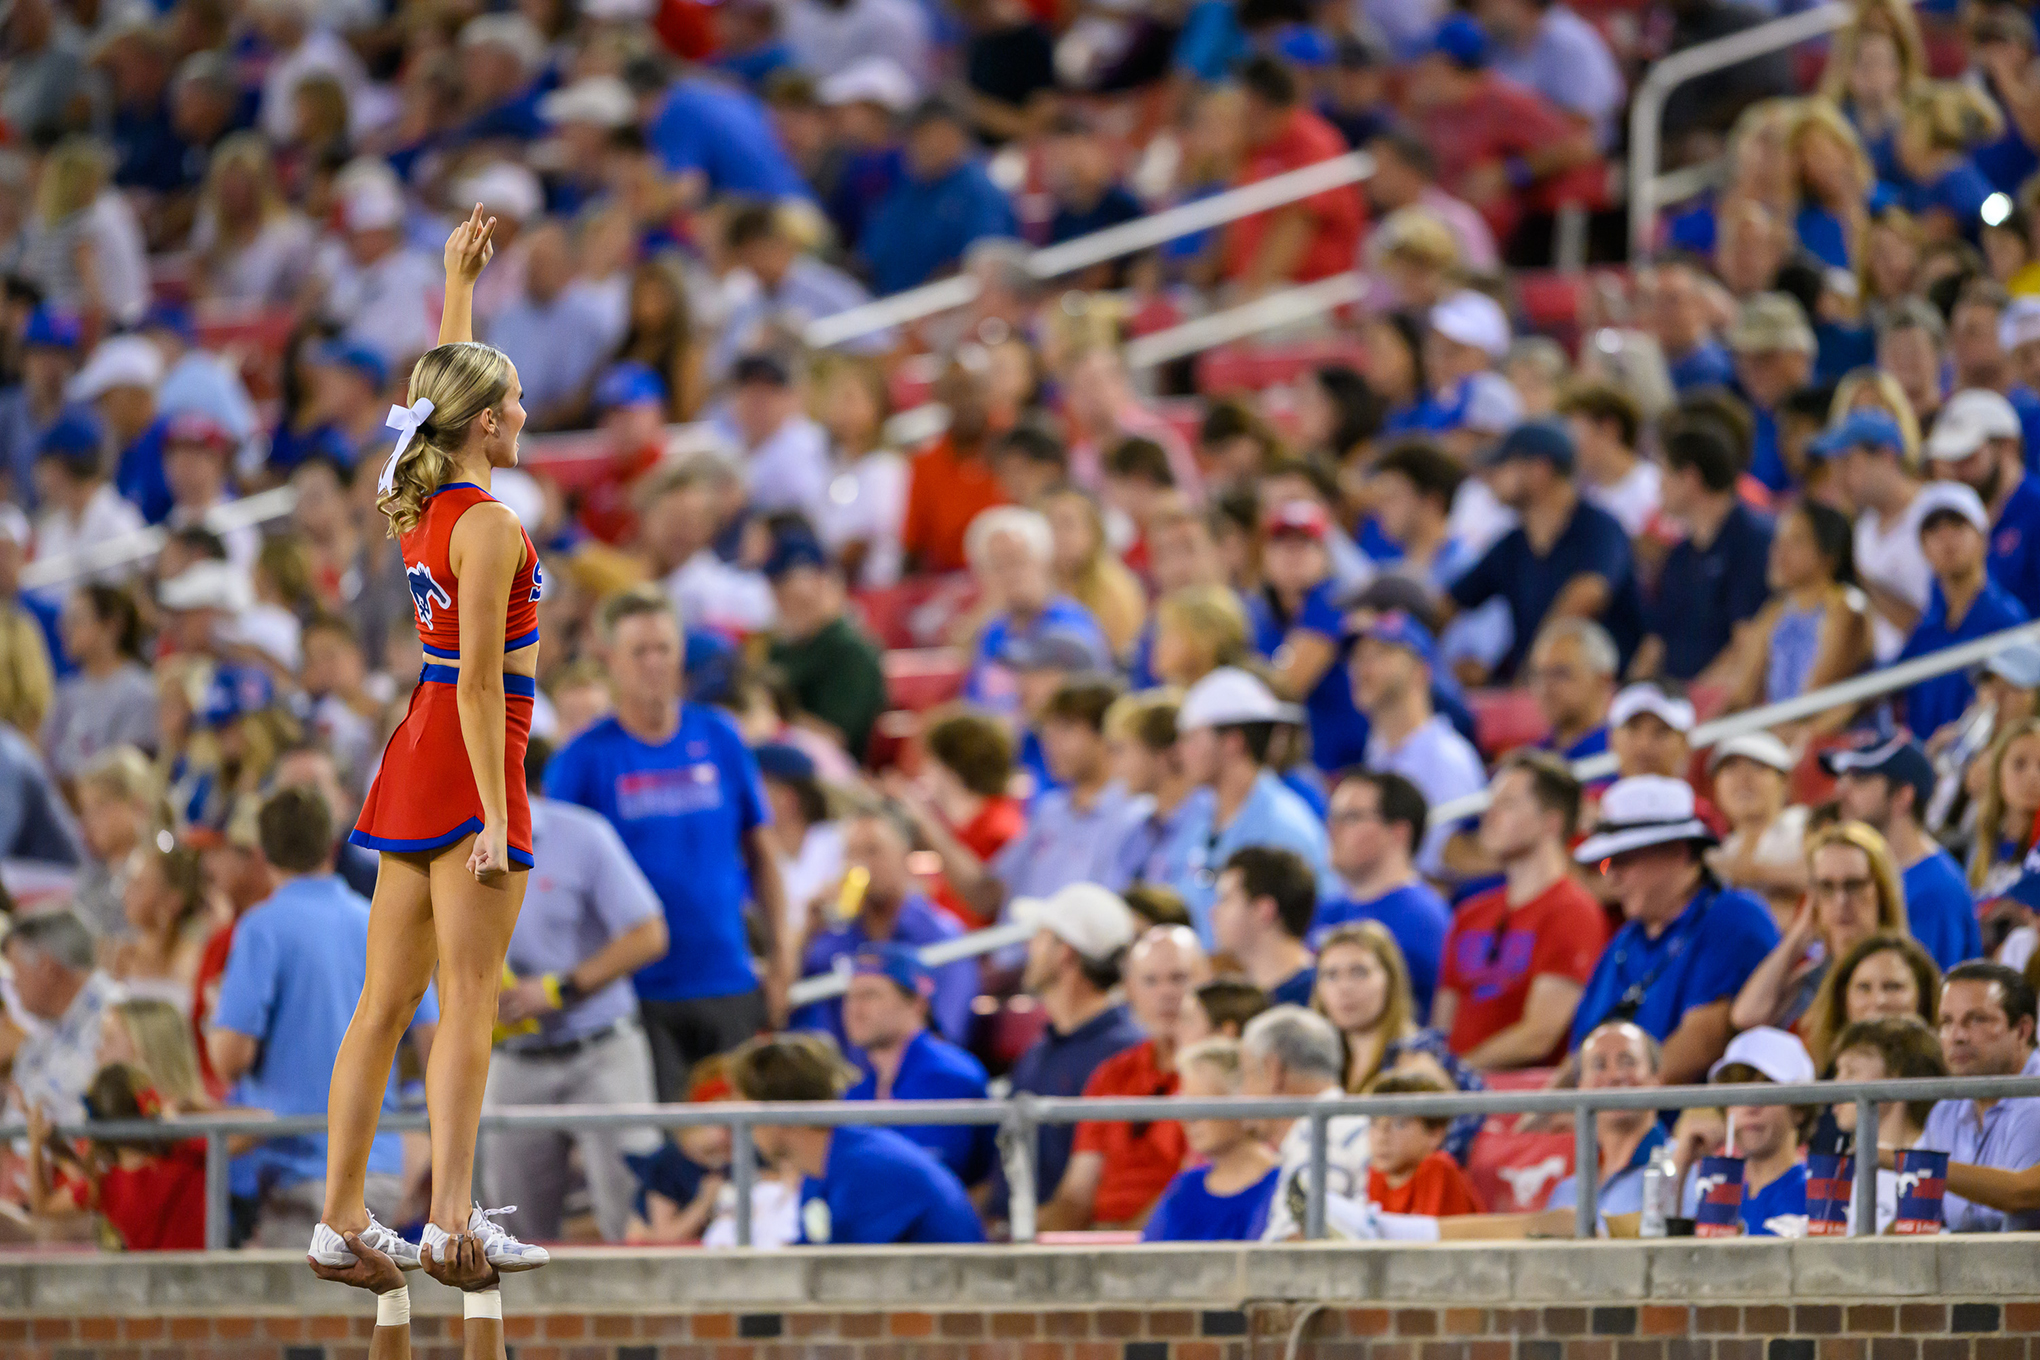 SMU cheerleader faces spectators during football game